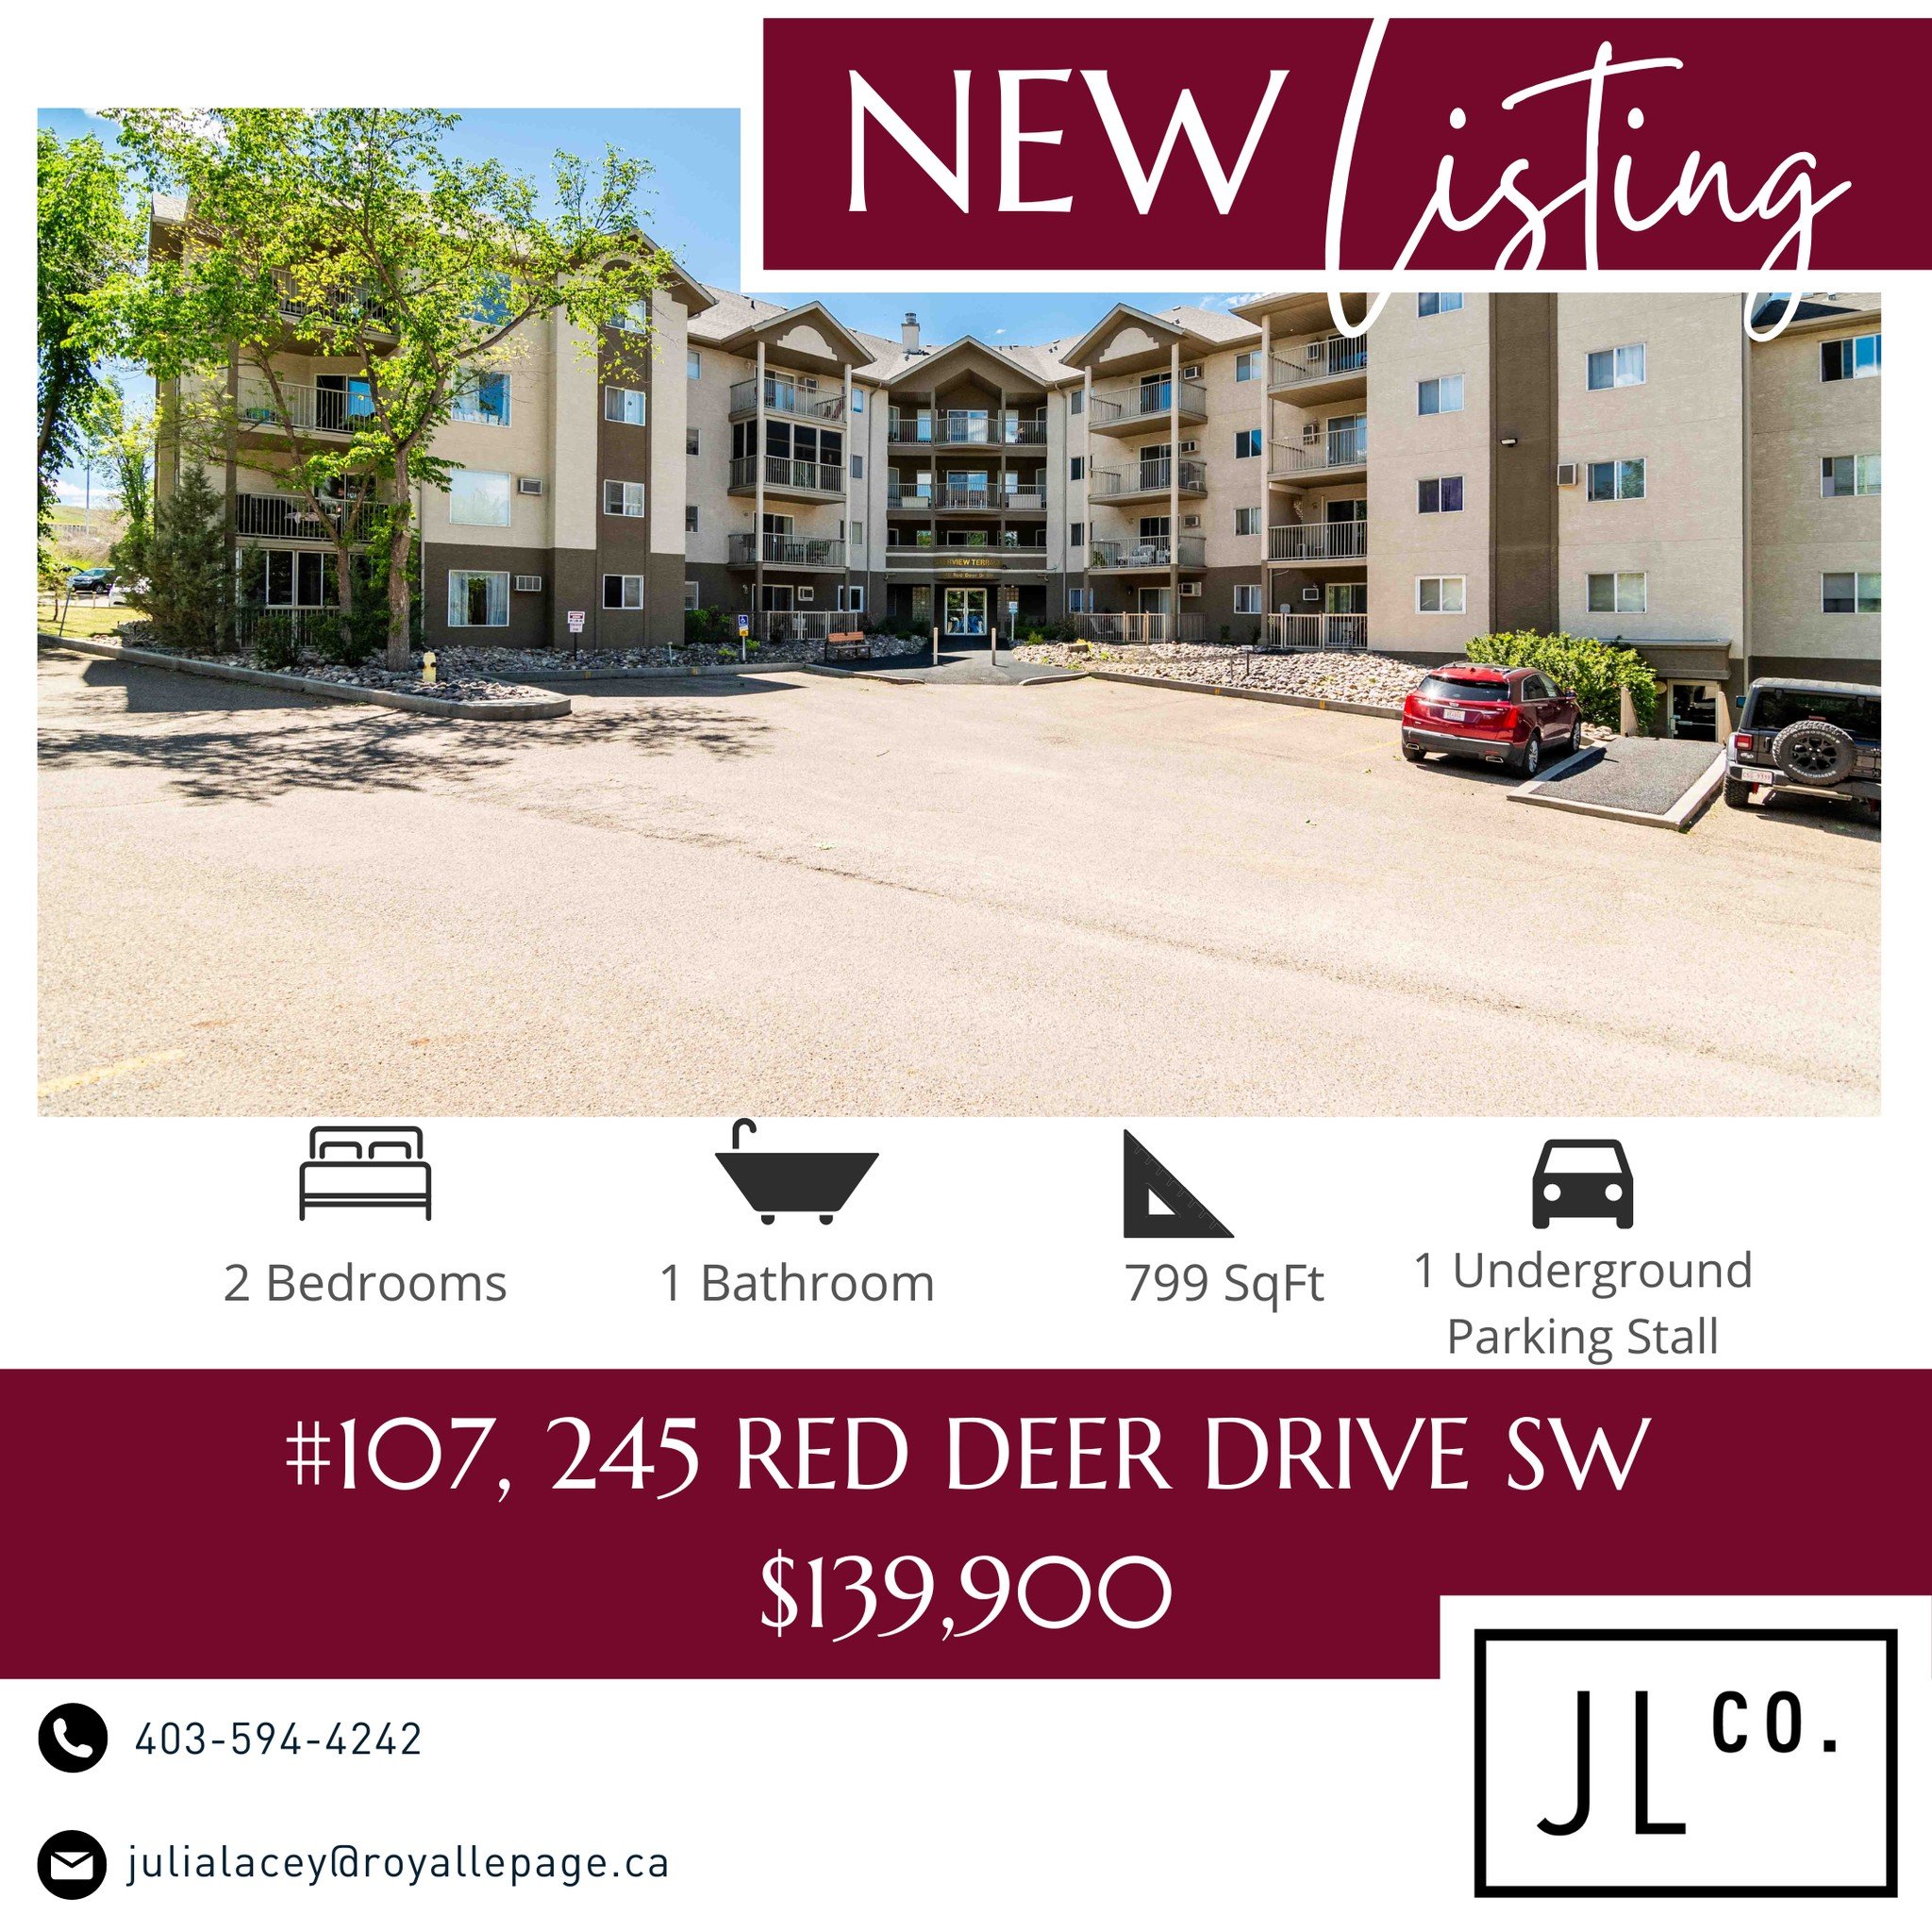 New Listing!!
Welcome to Riverview Terrace! This 799 sq. ft., 2-bedroom, 1-bathroom condo offers the perfect blend of convenience and comfort. Centrally located near the hospital, you can reach any part of Medicine Hat within minutes. As you enter, y